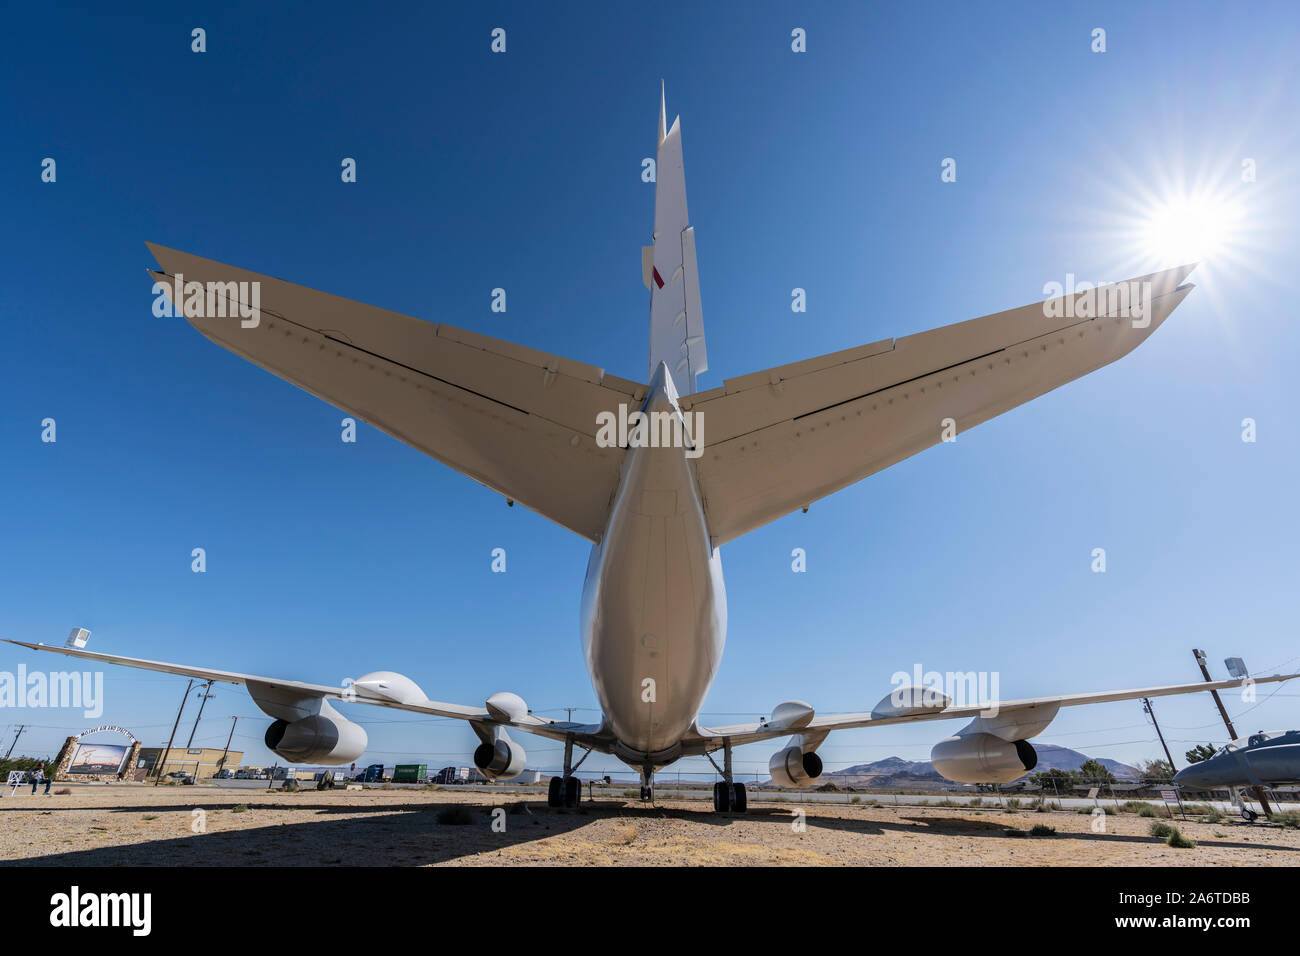 Mojave, California, USA - October 12, 2019:  Tail view of Roadside NASA Convair jet on display along Highway 58 business route at Mojave Air and Space Stock Photo